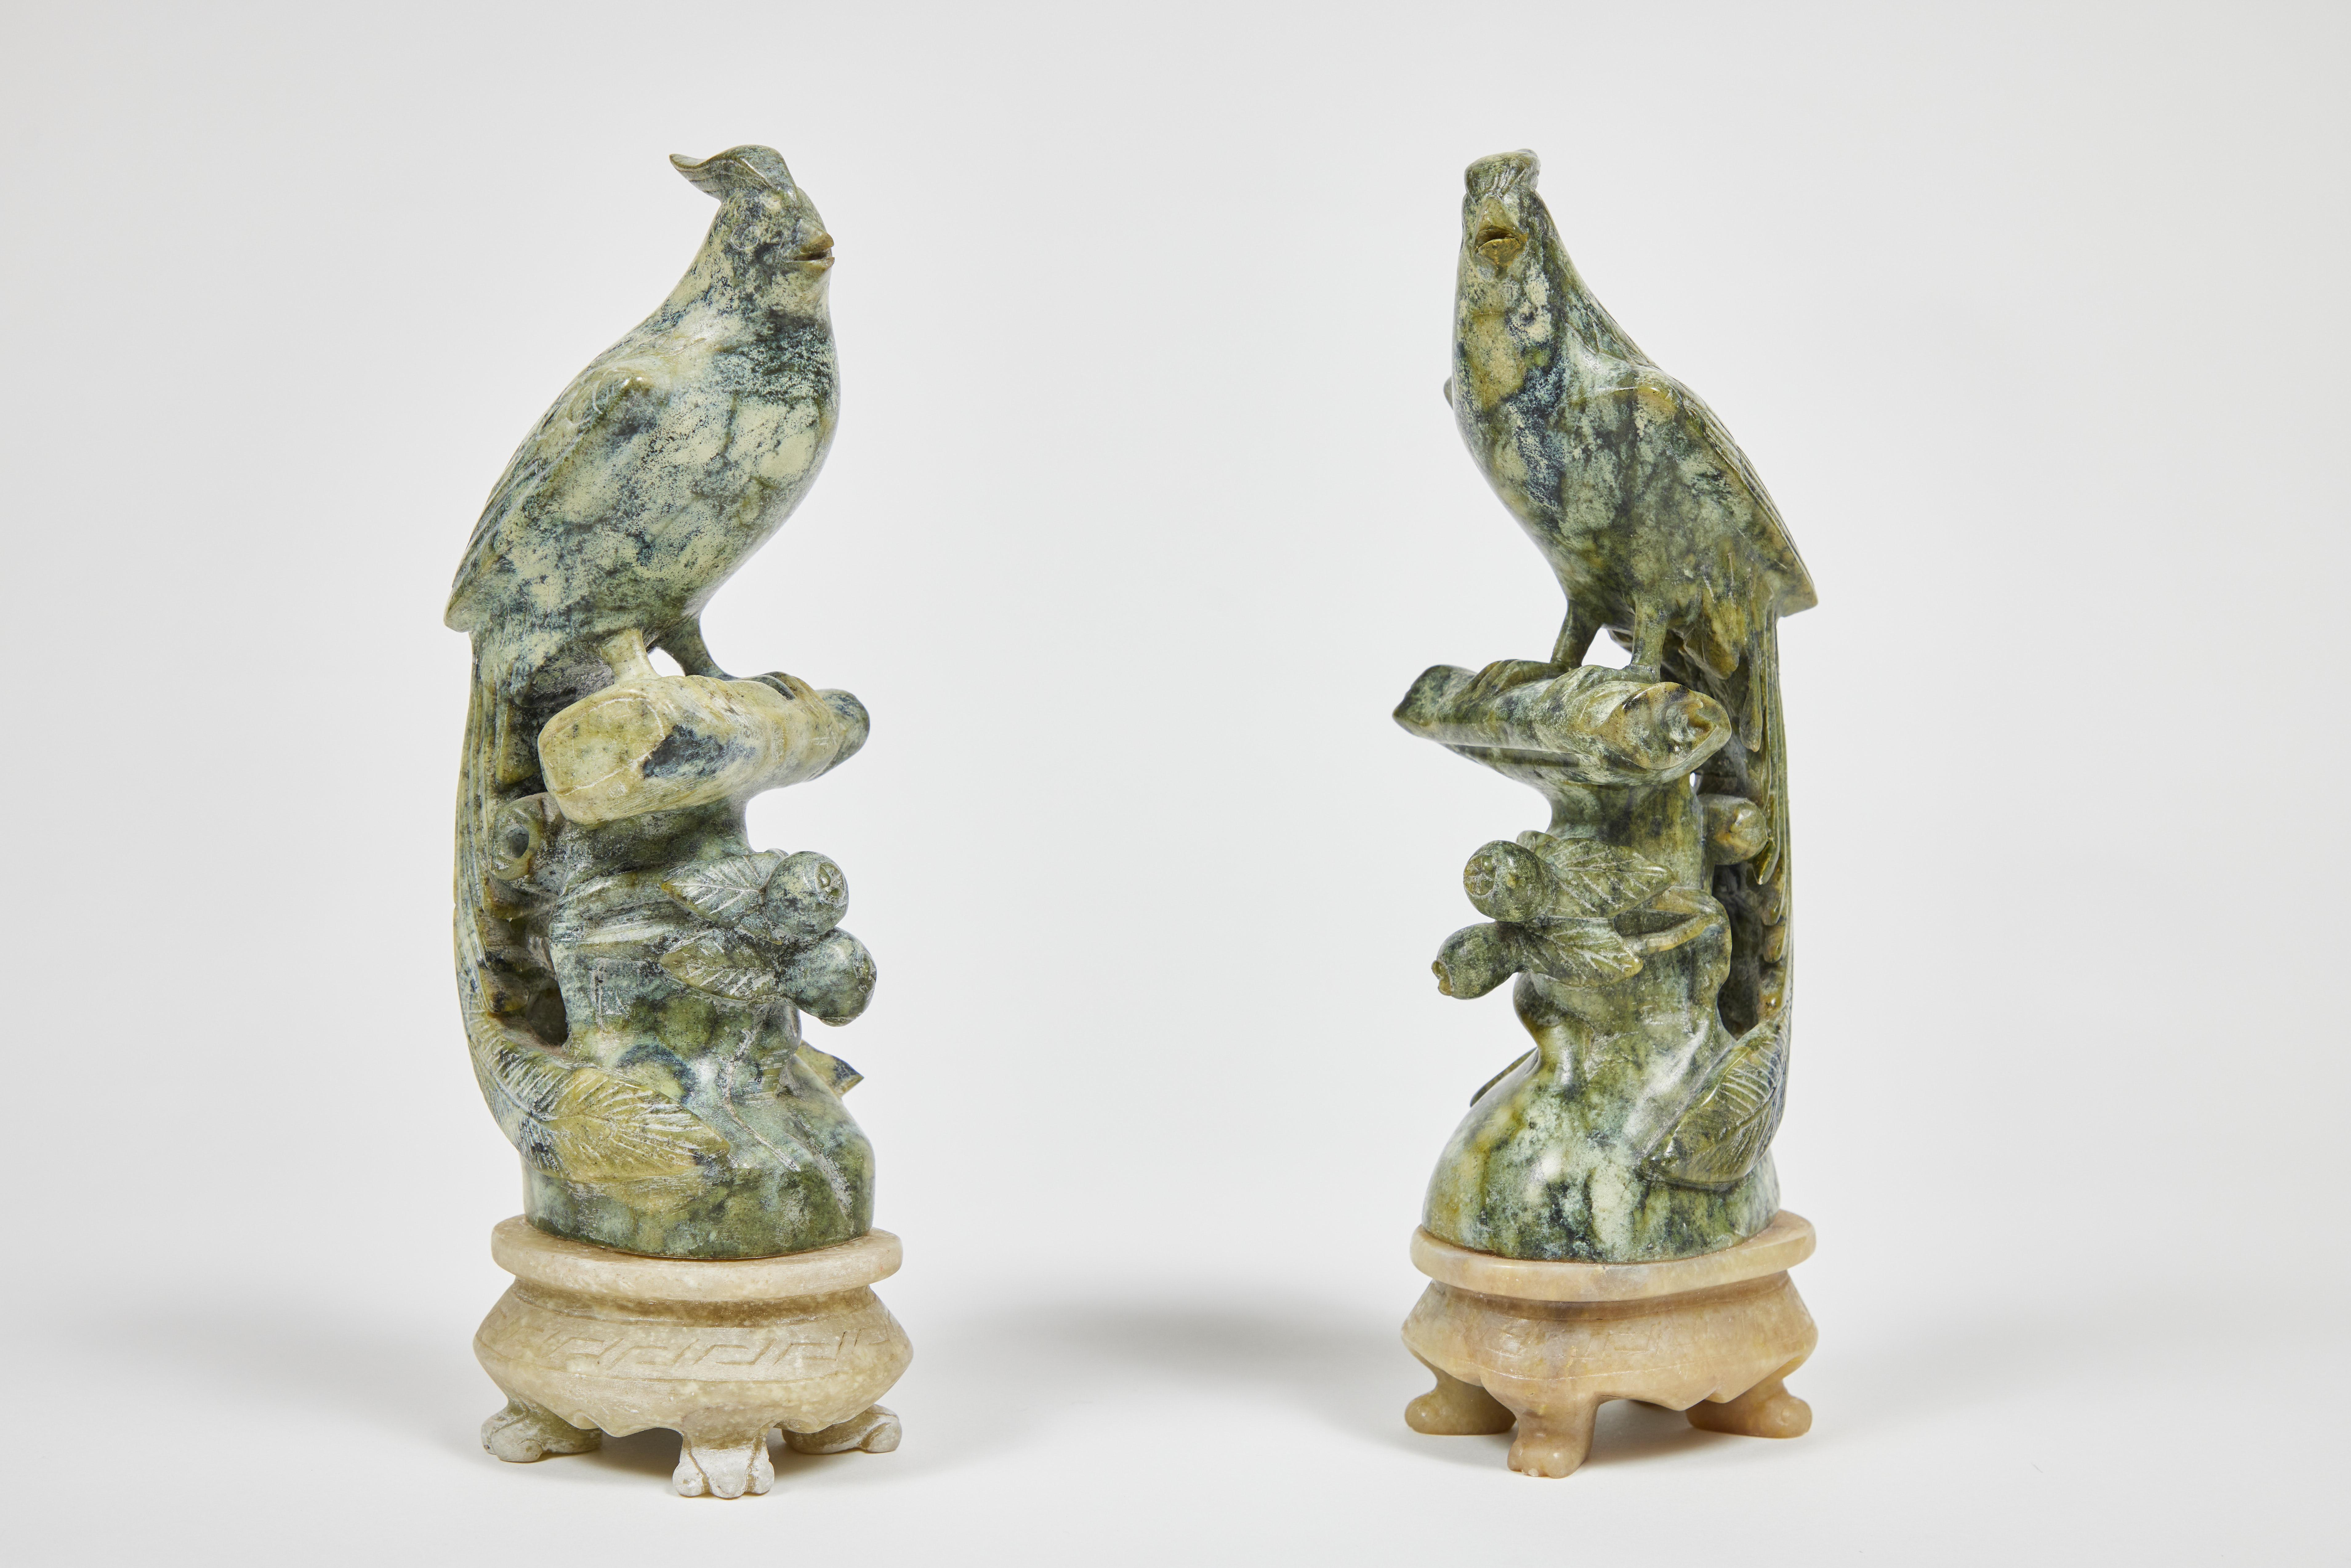 Fabulous pair of vintage carved mottled green stone parrots perched on a sold green stone footed base.

Each sculpted parrot measures 10.75